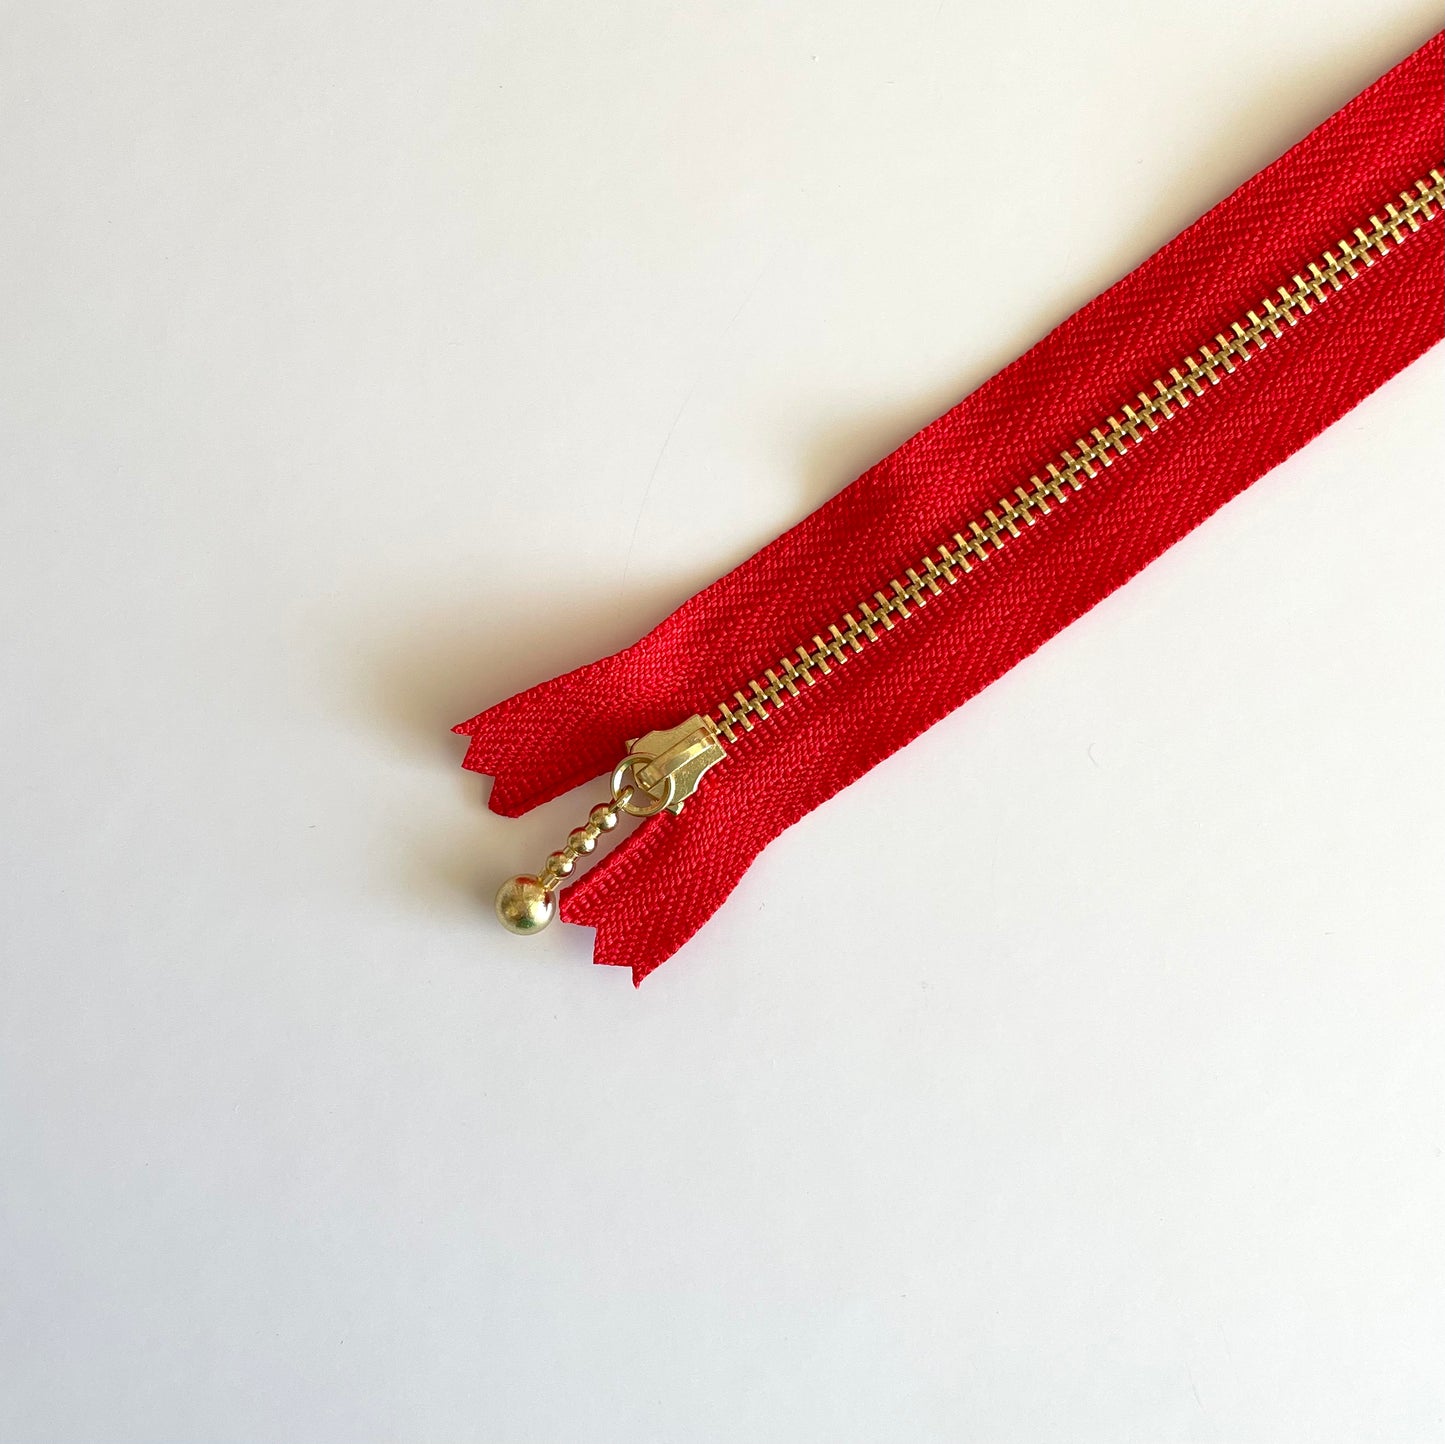 YKK Metalic Zippers with Water-drop Pull - Red (10" -25CM)